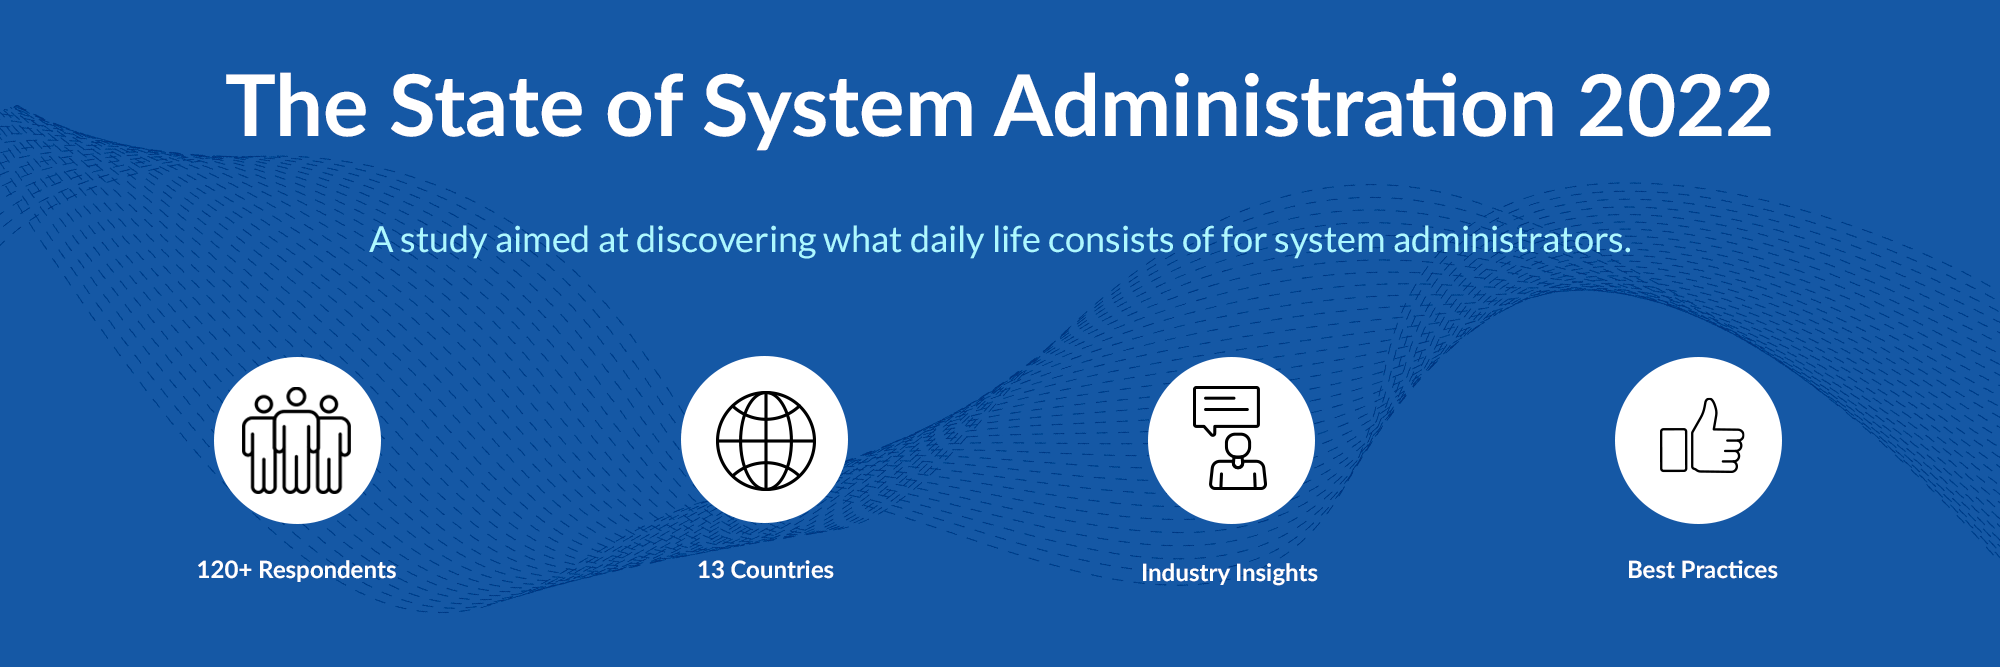 The State of System Administration 2022. A study aimed at discovering what daily life consists of for system administrators. 120+ Respondents. 13 Countries. Industry Insights. Best Practices.